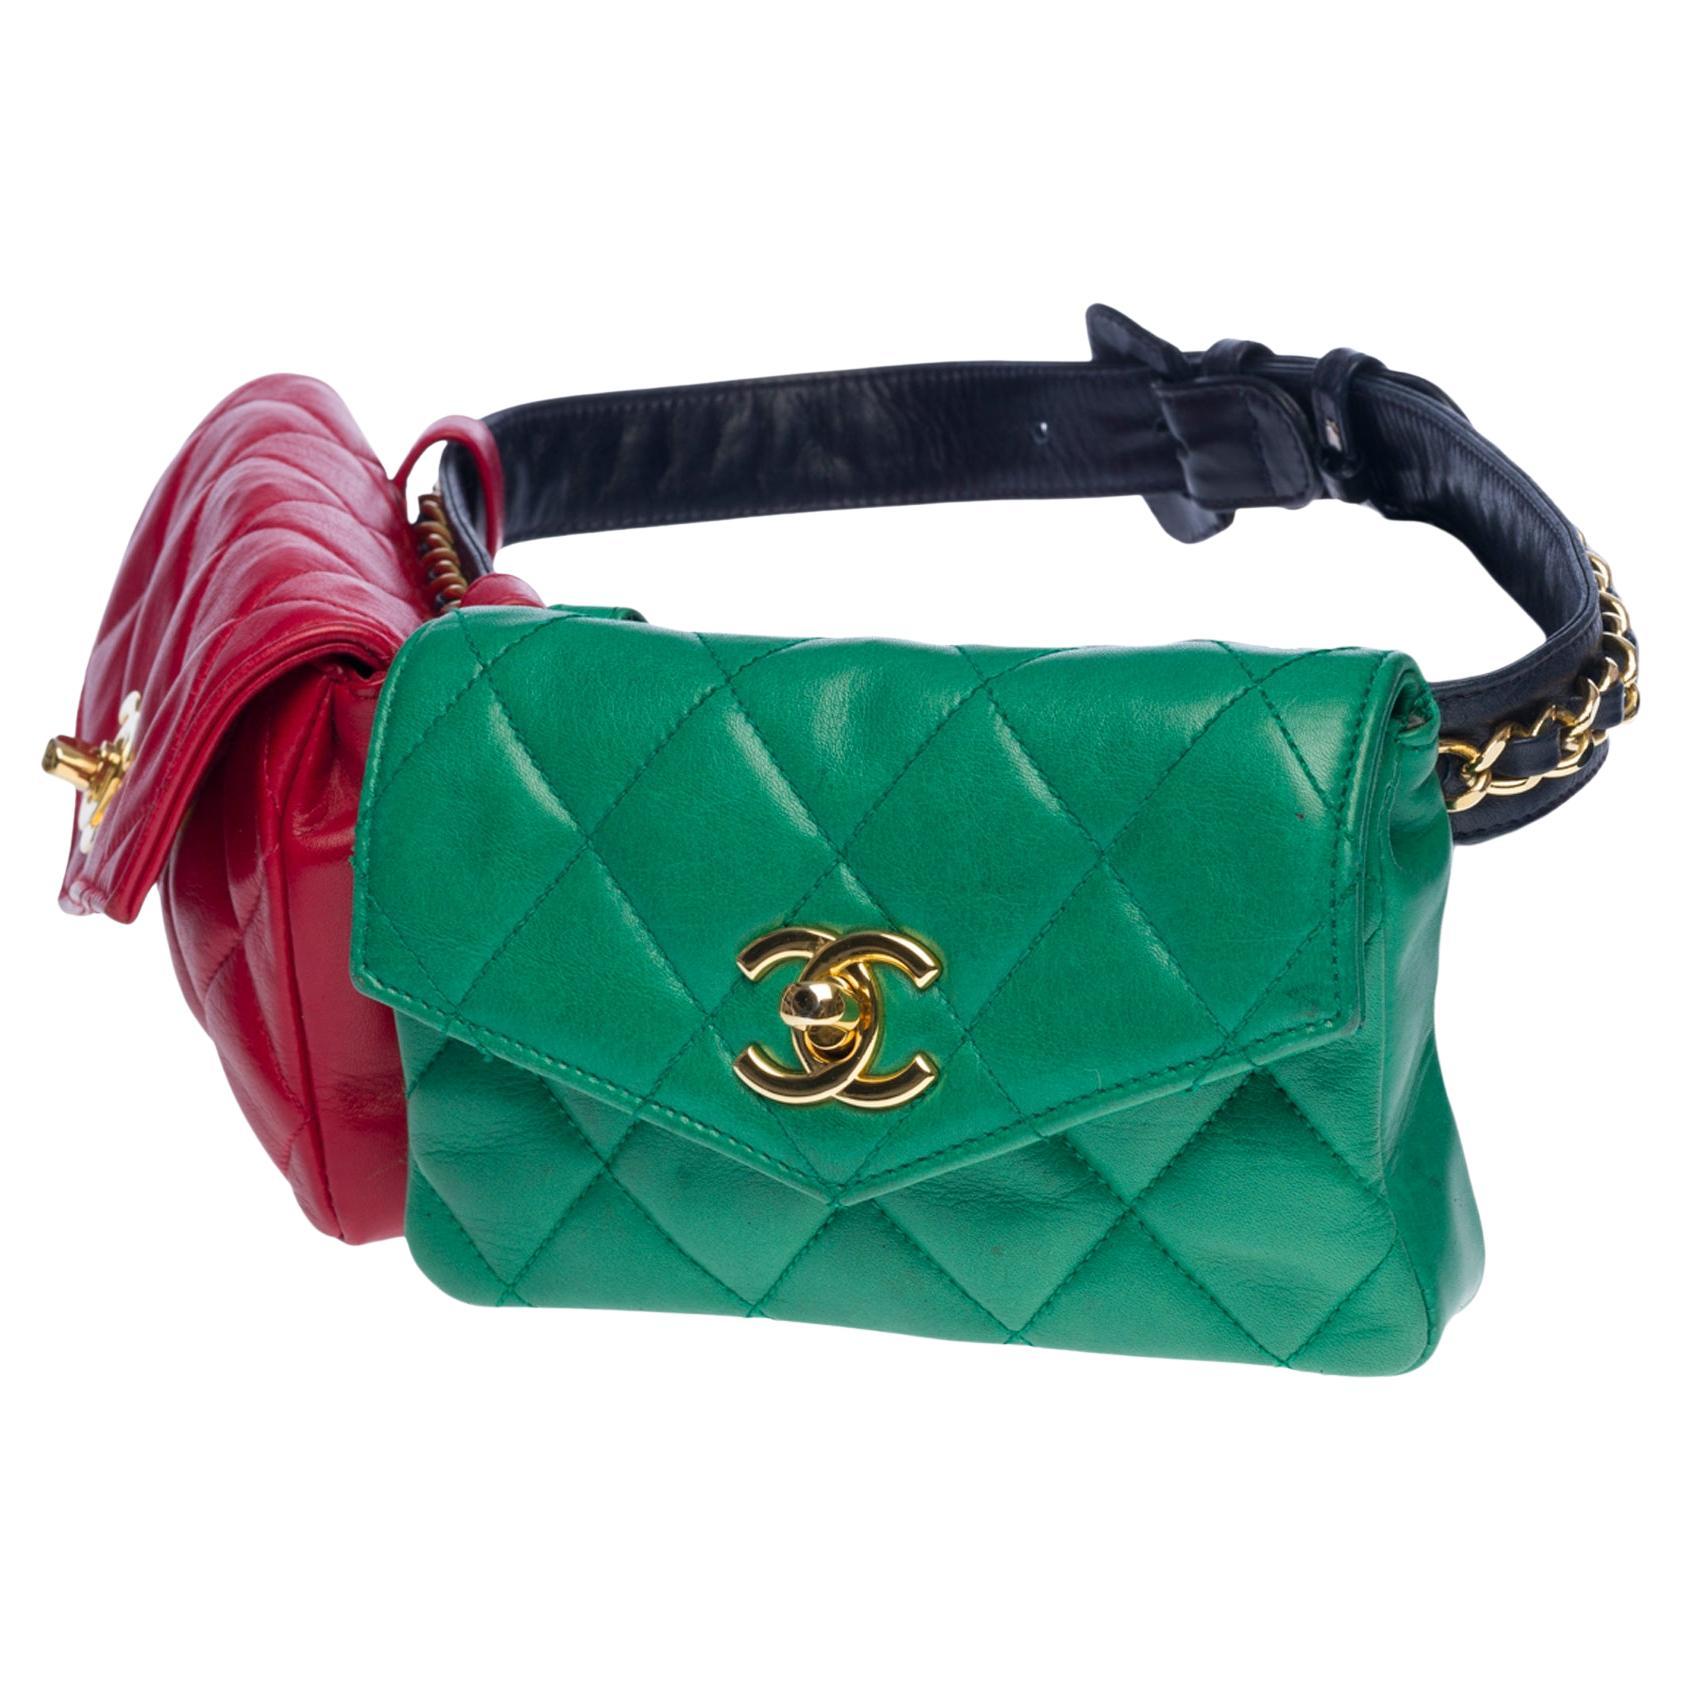 Gorgeous Chanel double bag belt in red and green quilted lambskin leather,  GHW